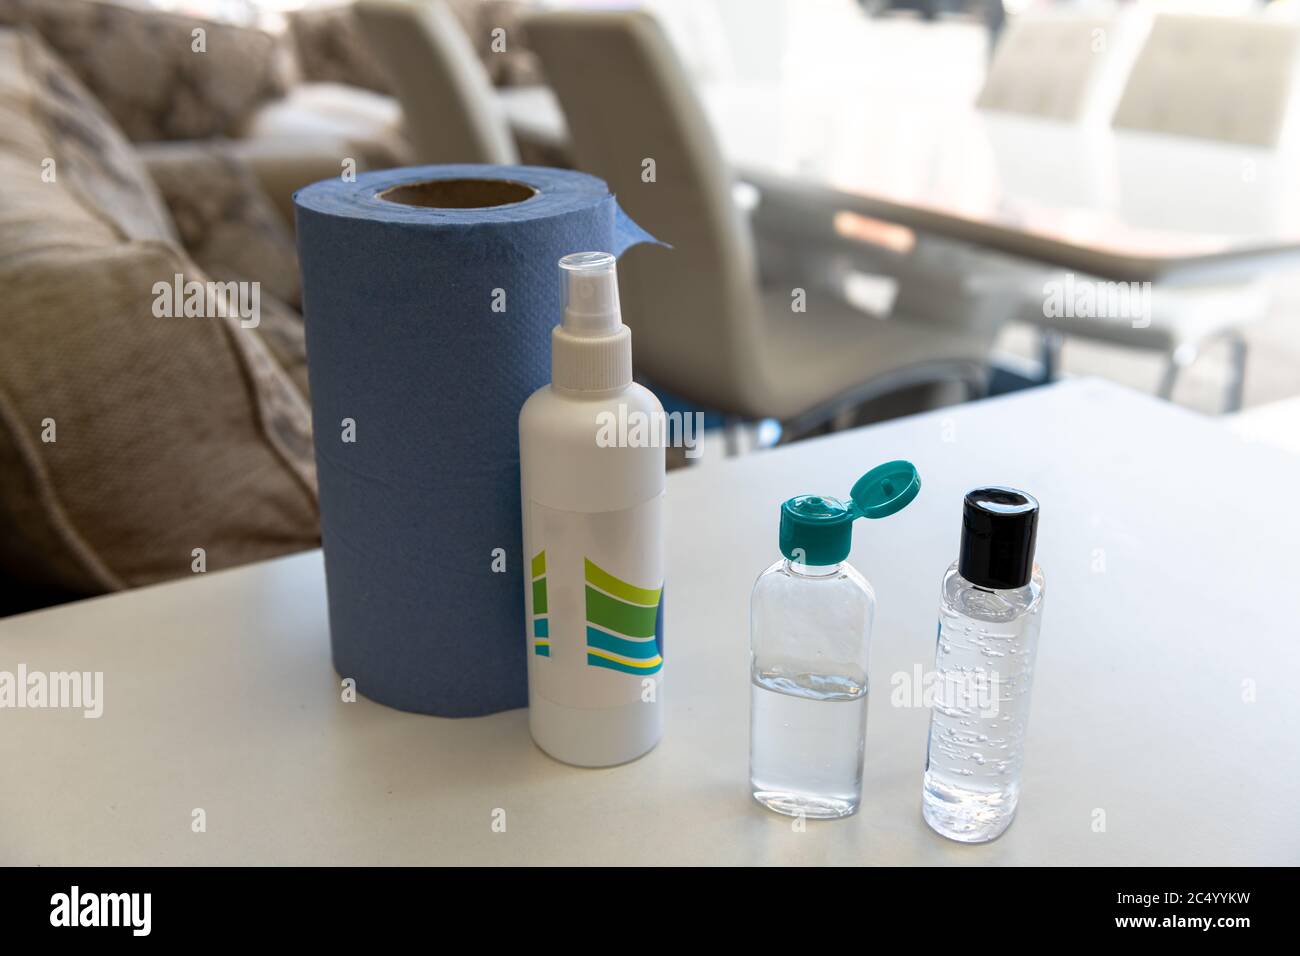 Anti bacterial hand gel and disinfectant by the entrance of a high street retailer. Stock Photo